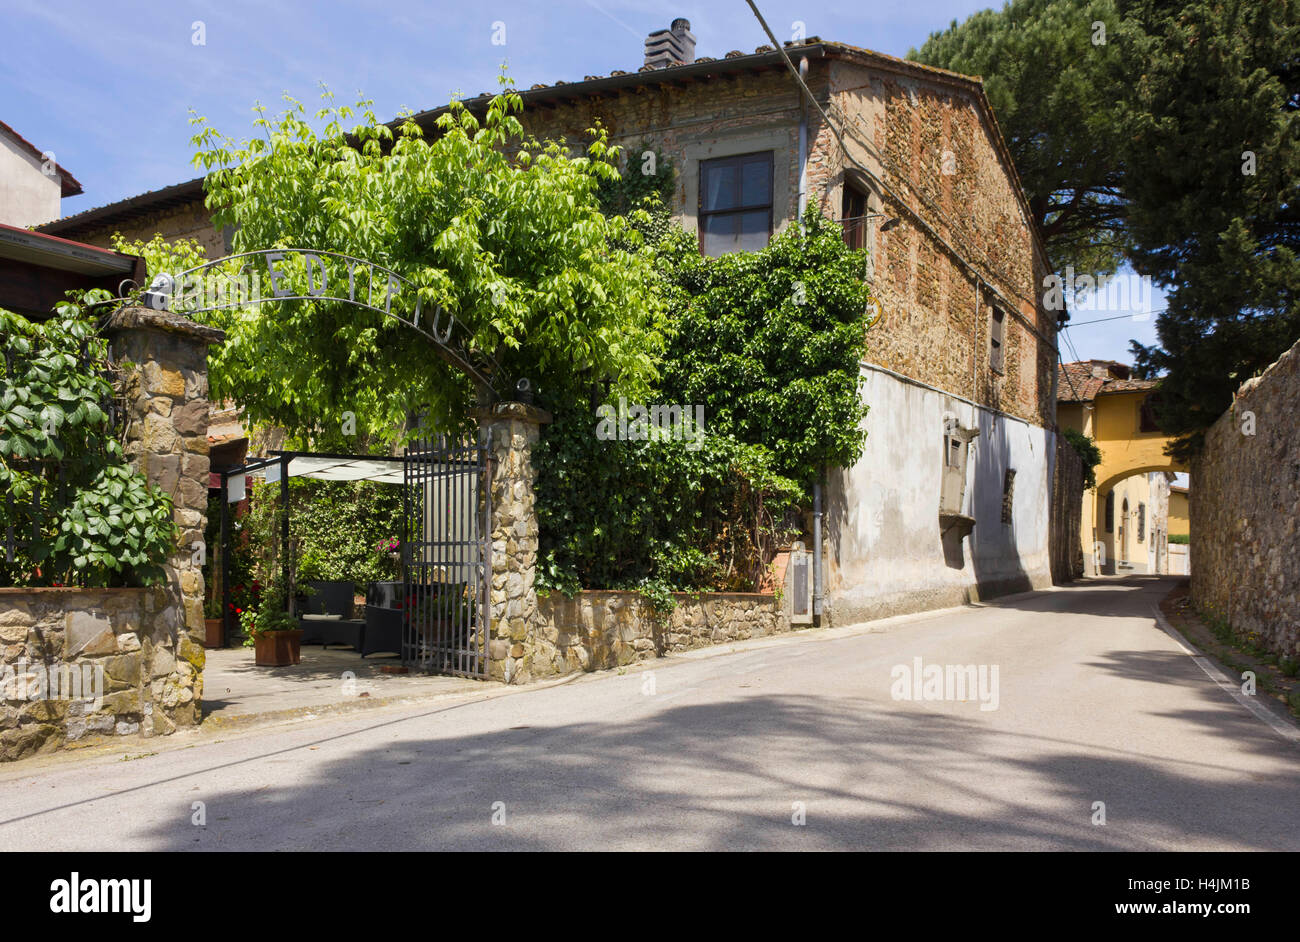 LASTRA A SIGNA, ITALY - MAY 21 2016: External view of the entrance of historical Edy Piu traditional restaurant on Tuscan Hills Stock Photo